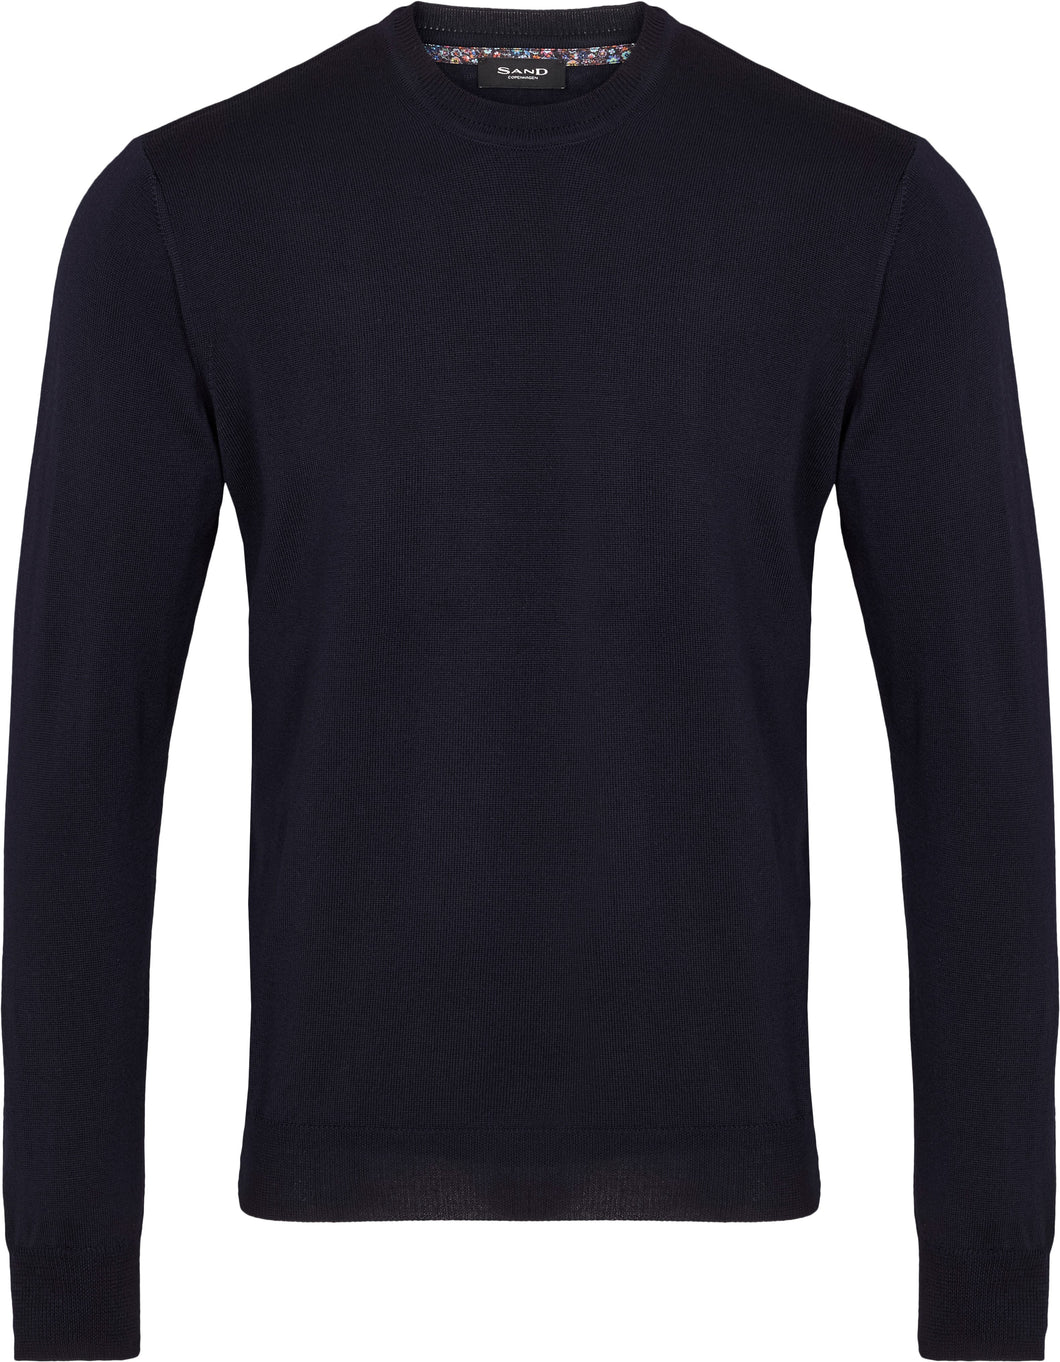 SAND Cashmere Blend Cable Knit Crew Neck in Navy 5477 IQ